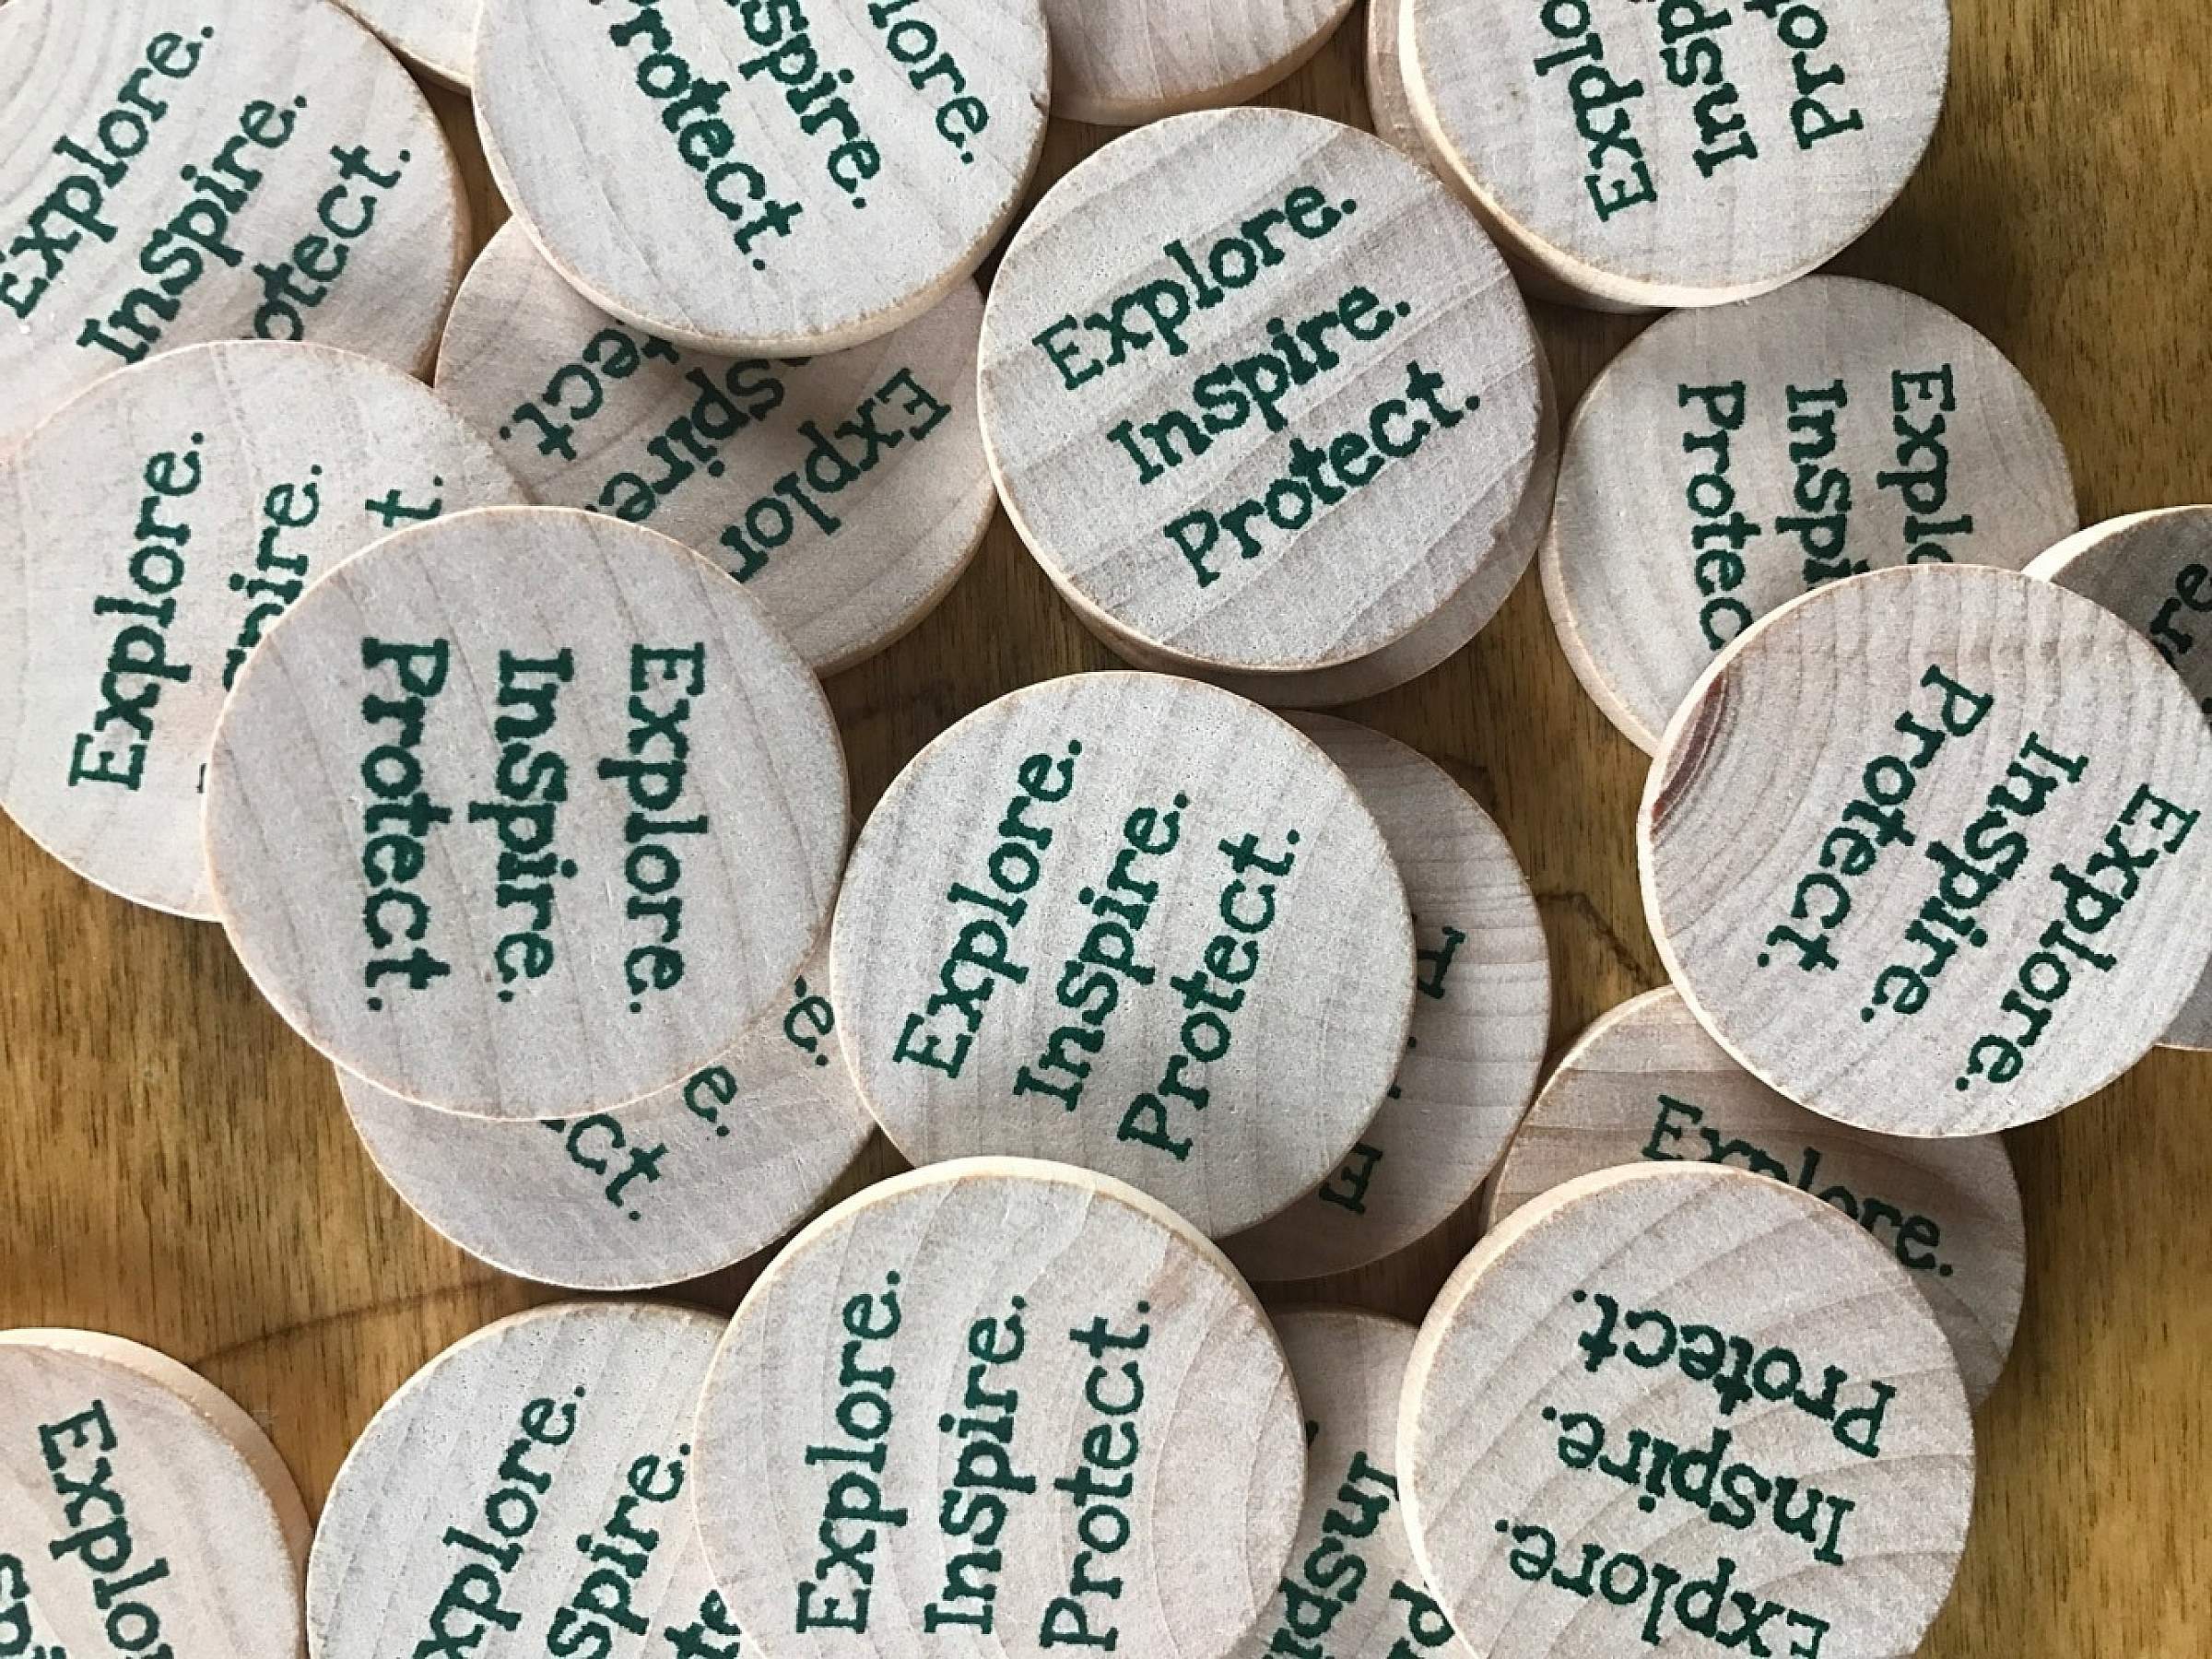 Wood tokens to donate to an environmental cause